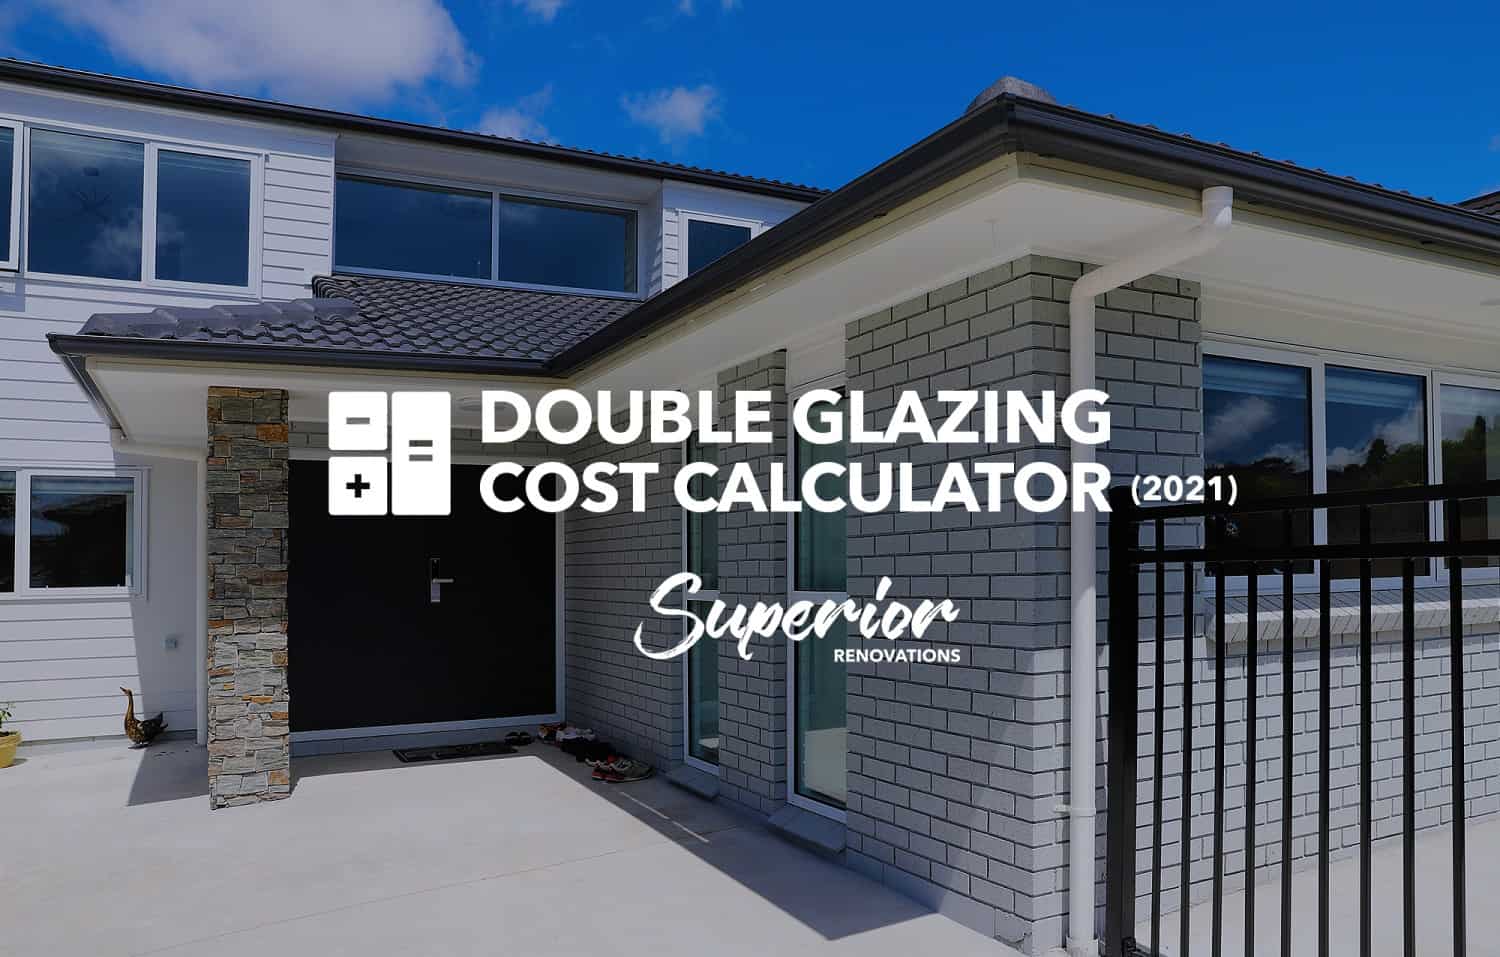 Whitney aerolíneas Embotellamiento Double Glazing Cost Calculator NZ for 2021 by Superior Renovations ®